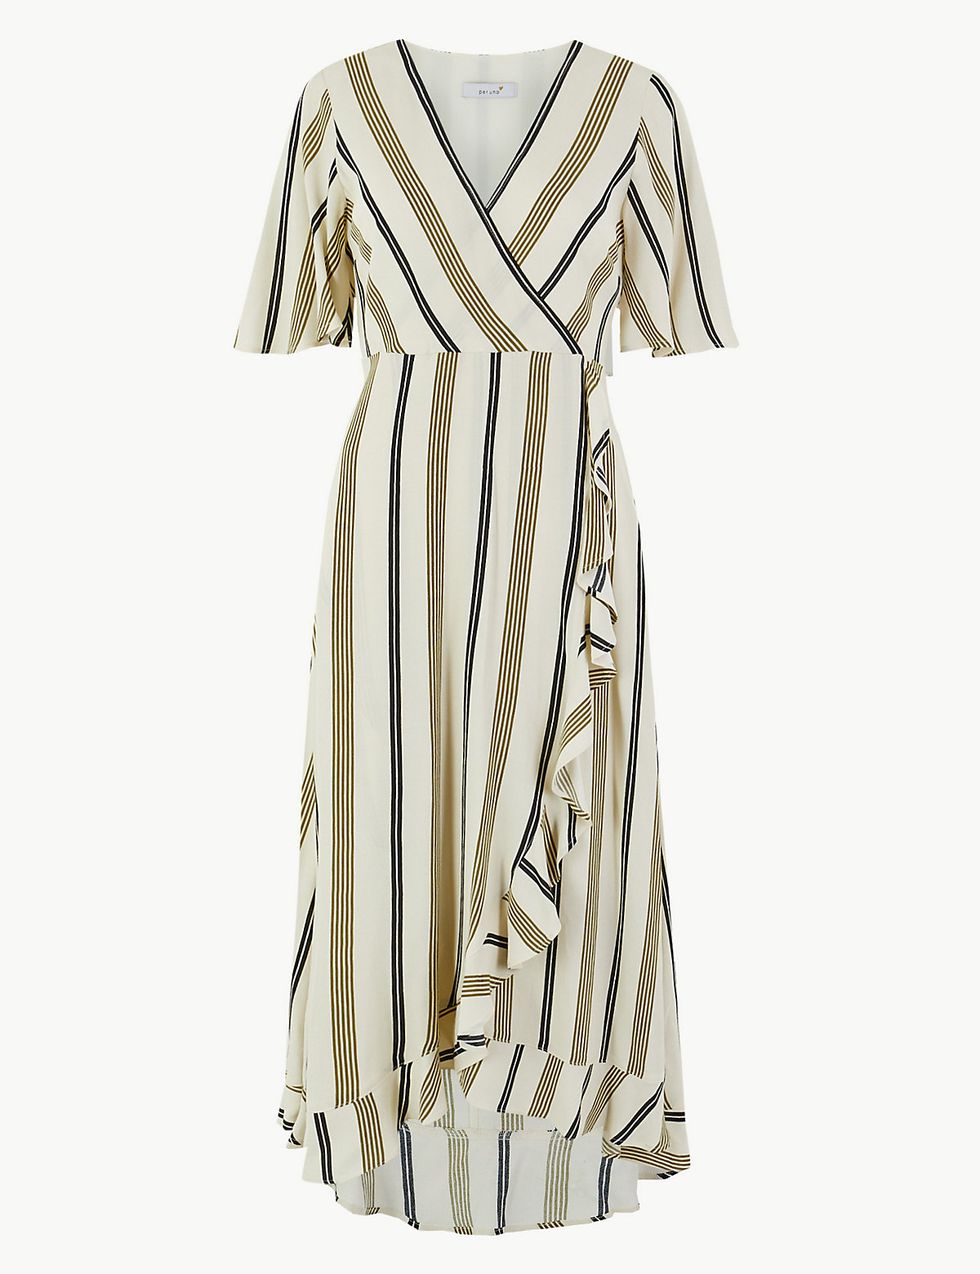 This £35 Topshop dress looks a lot like a £330 designer version